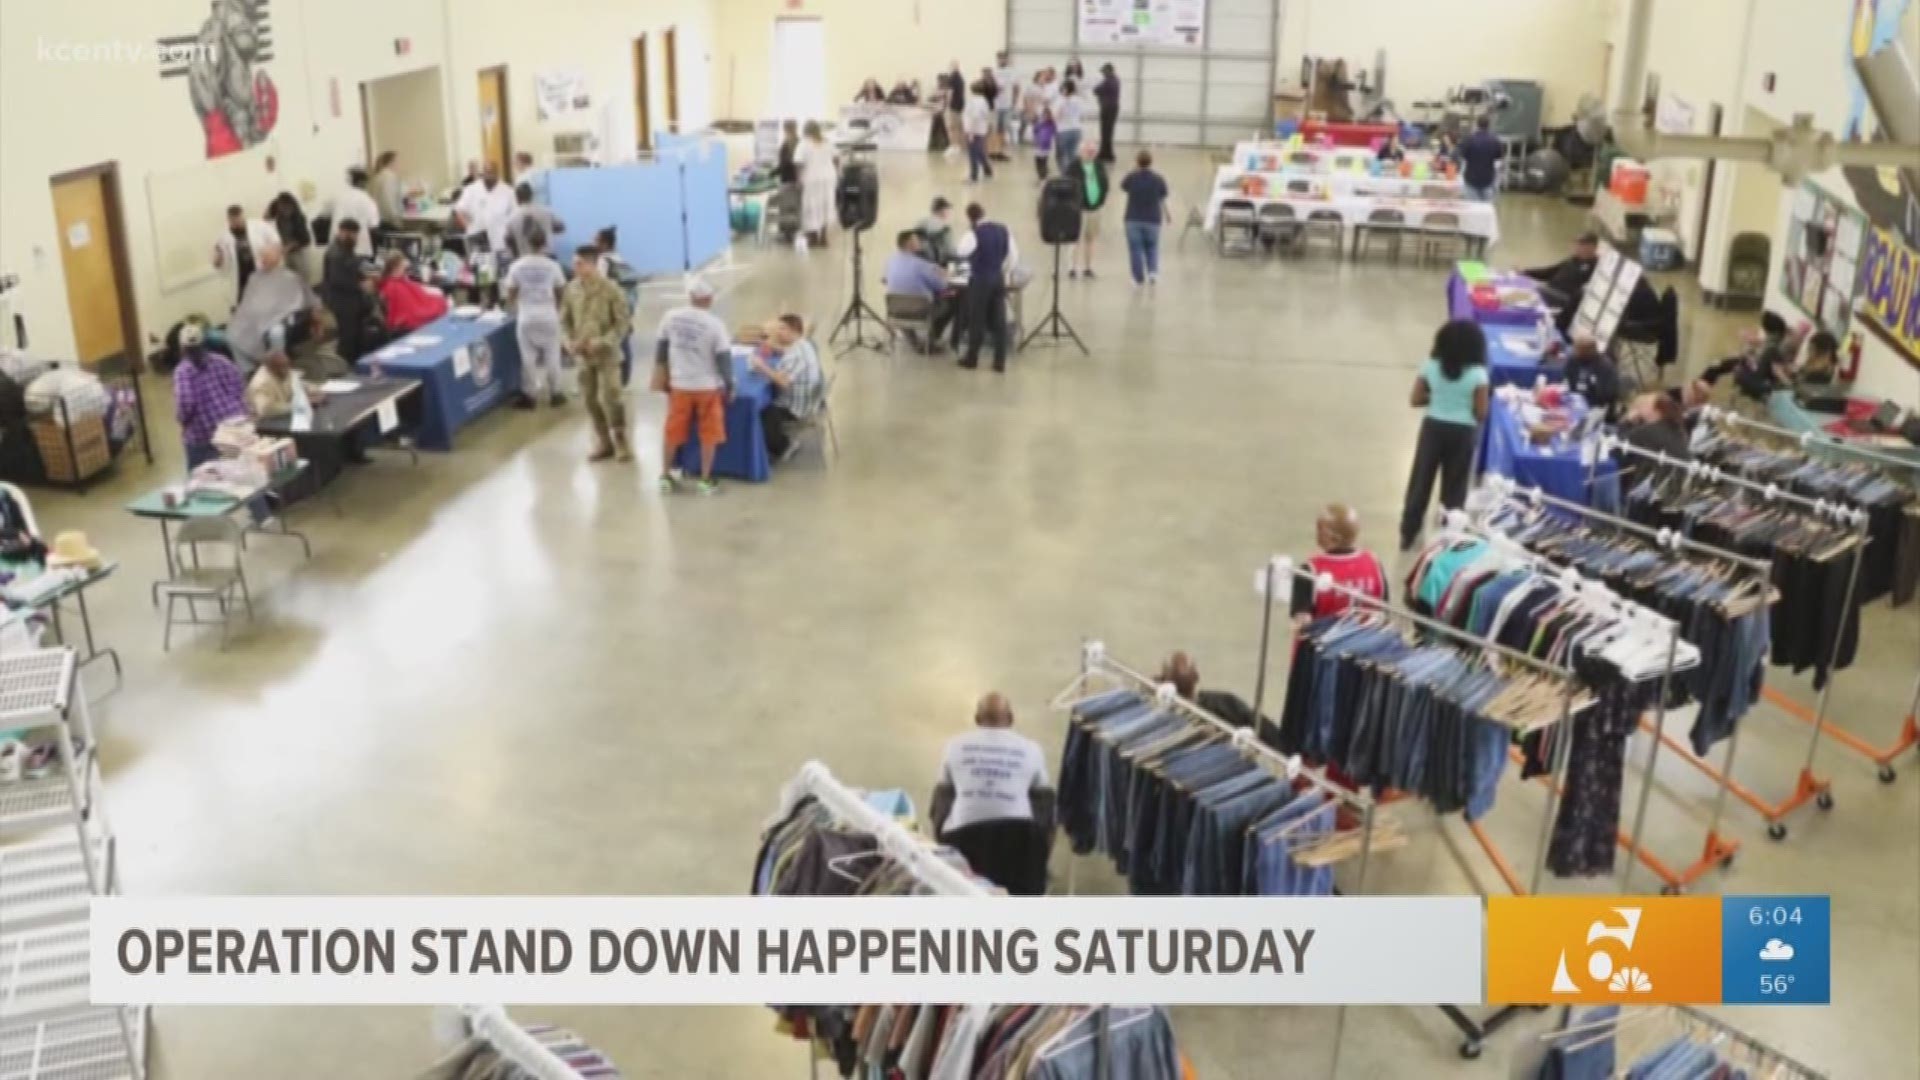 The fight against veteran homelessness is constant. Help the cause with Operation Stand Down Central Texas on Saturday as they provide a hot meal, haircut, medical and dental screenings and new clothing for the homeless in Bell County.